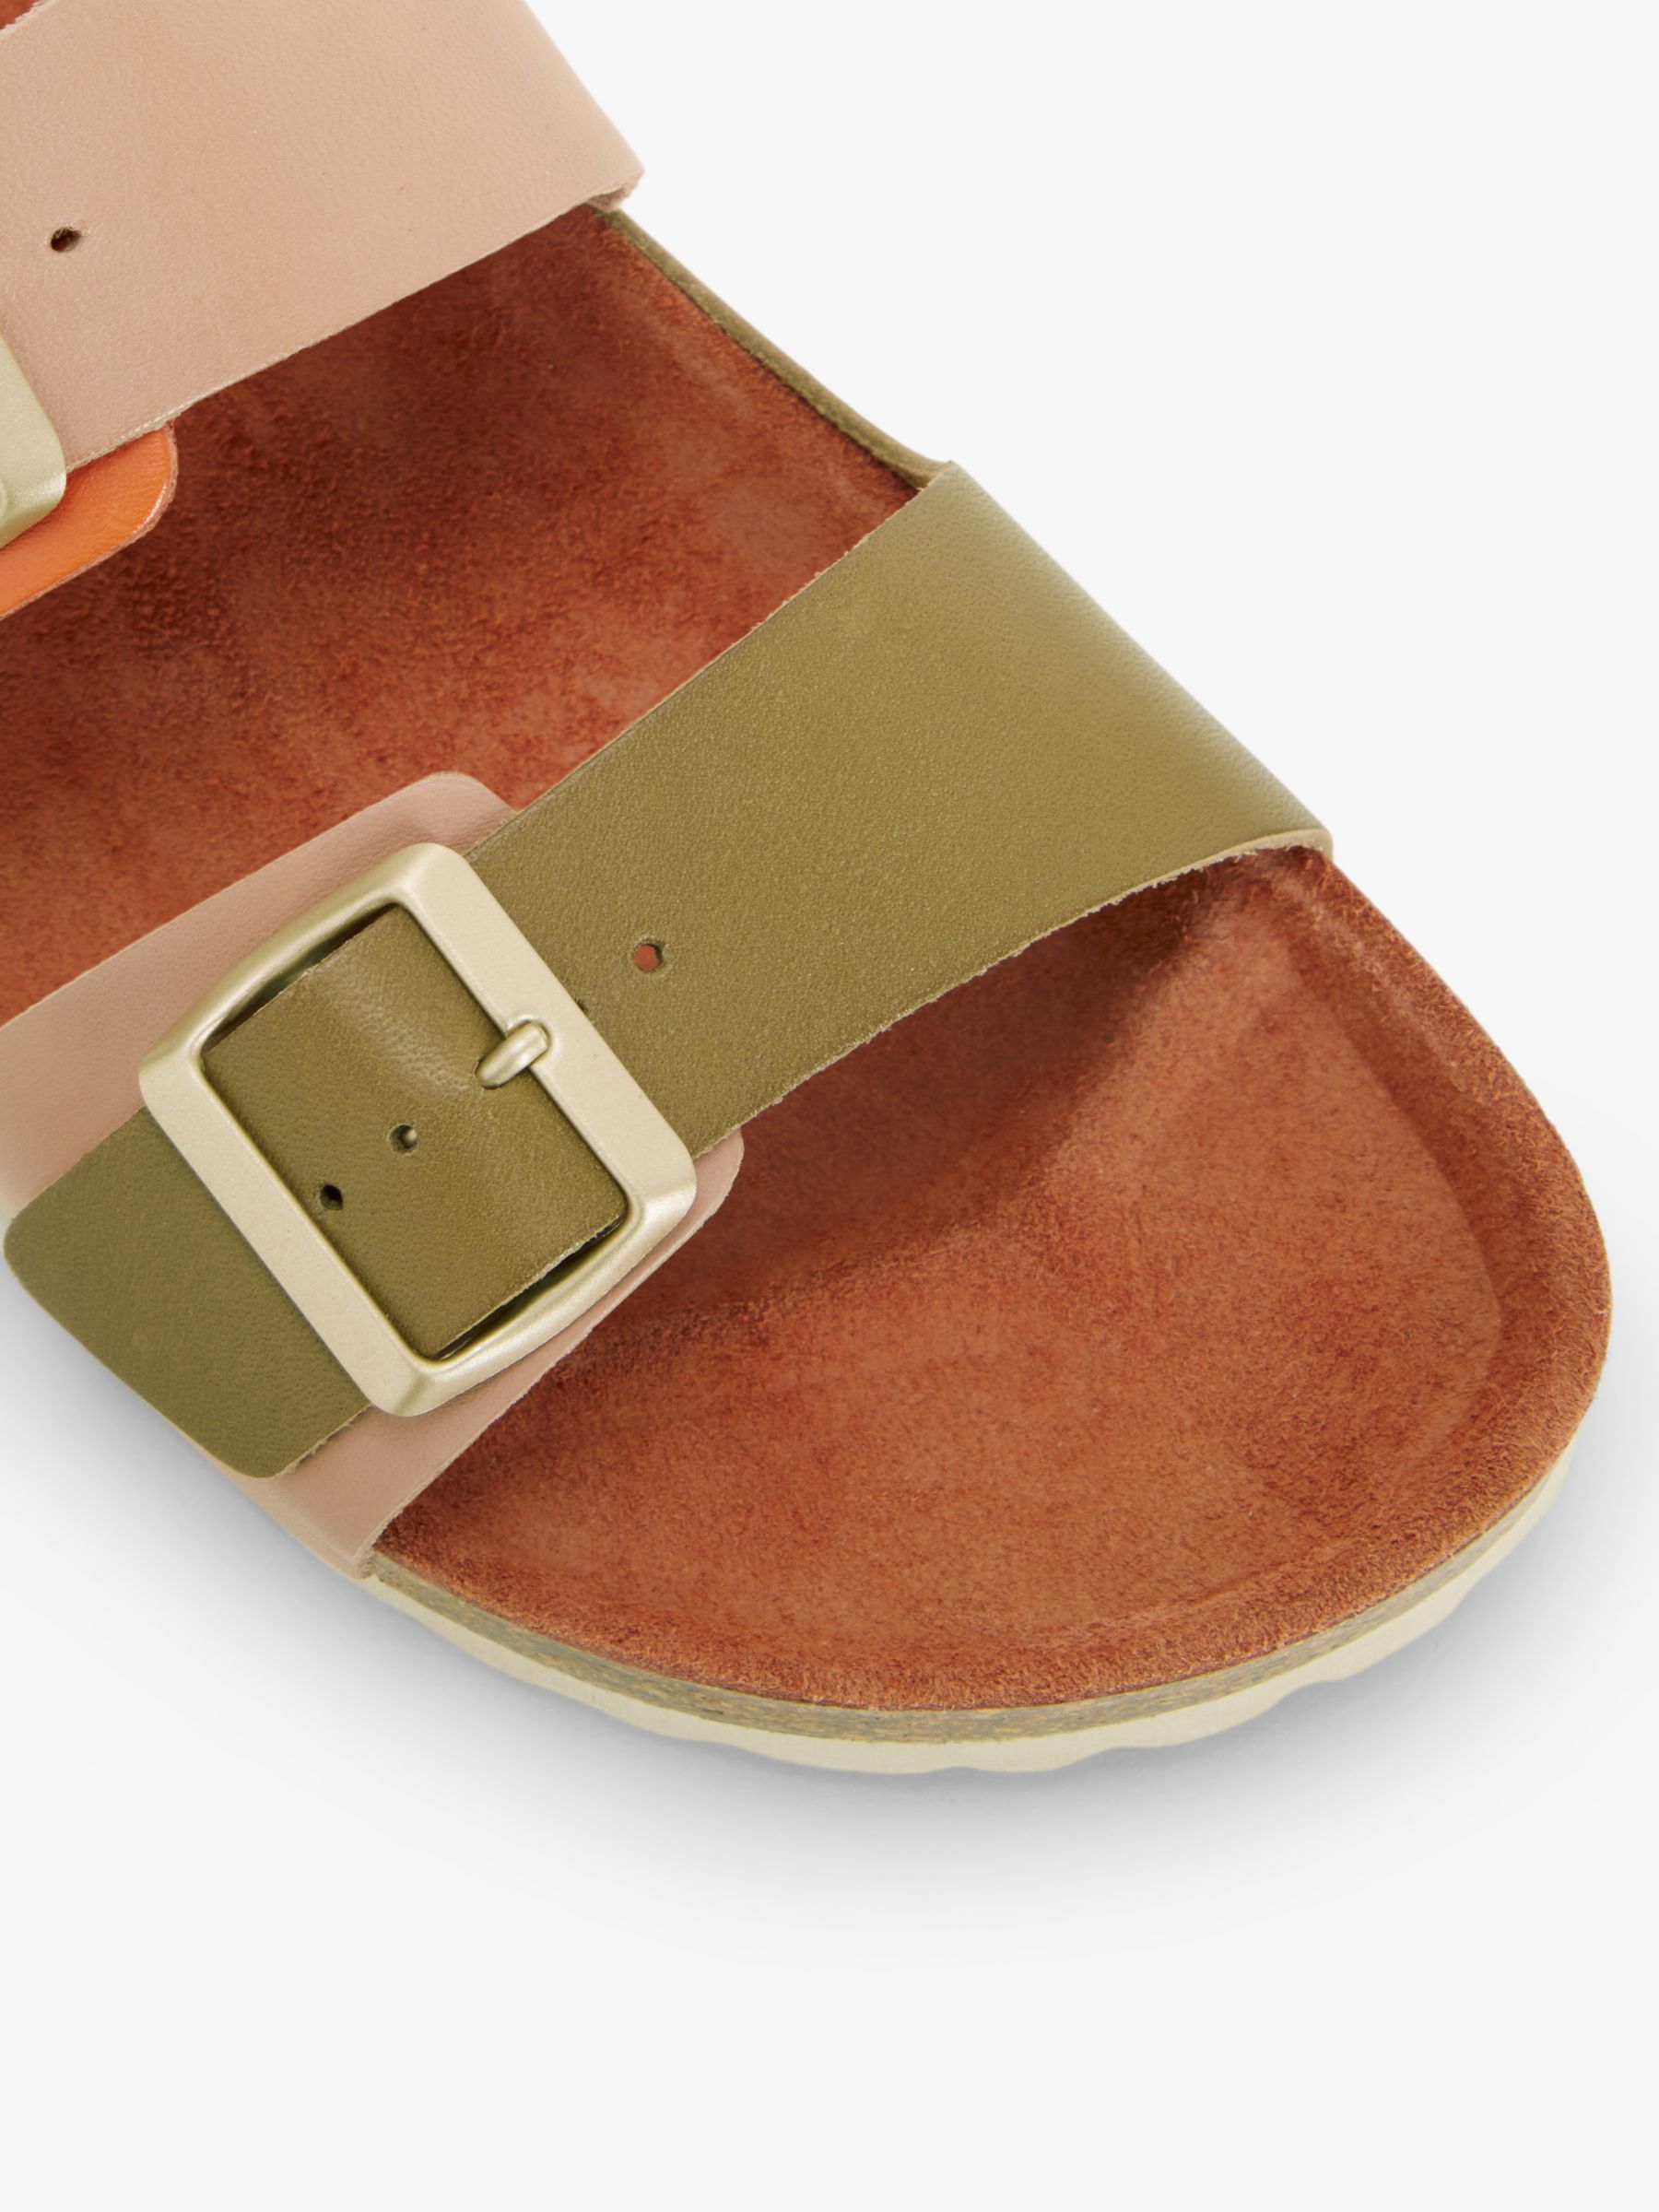 Buy John Lewis Lolly Leather Sandals Online at johnlewis.com